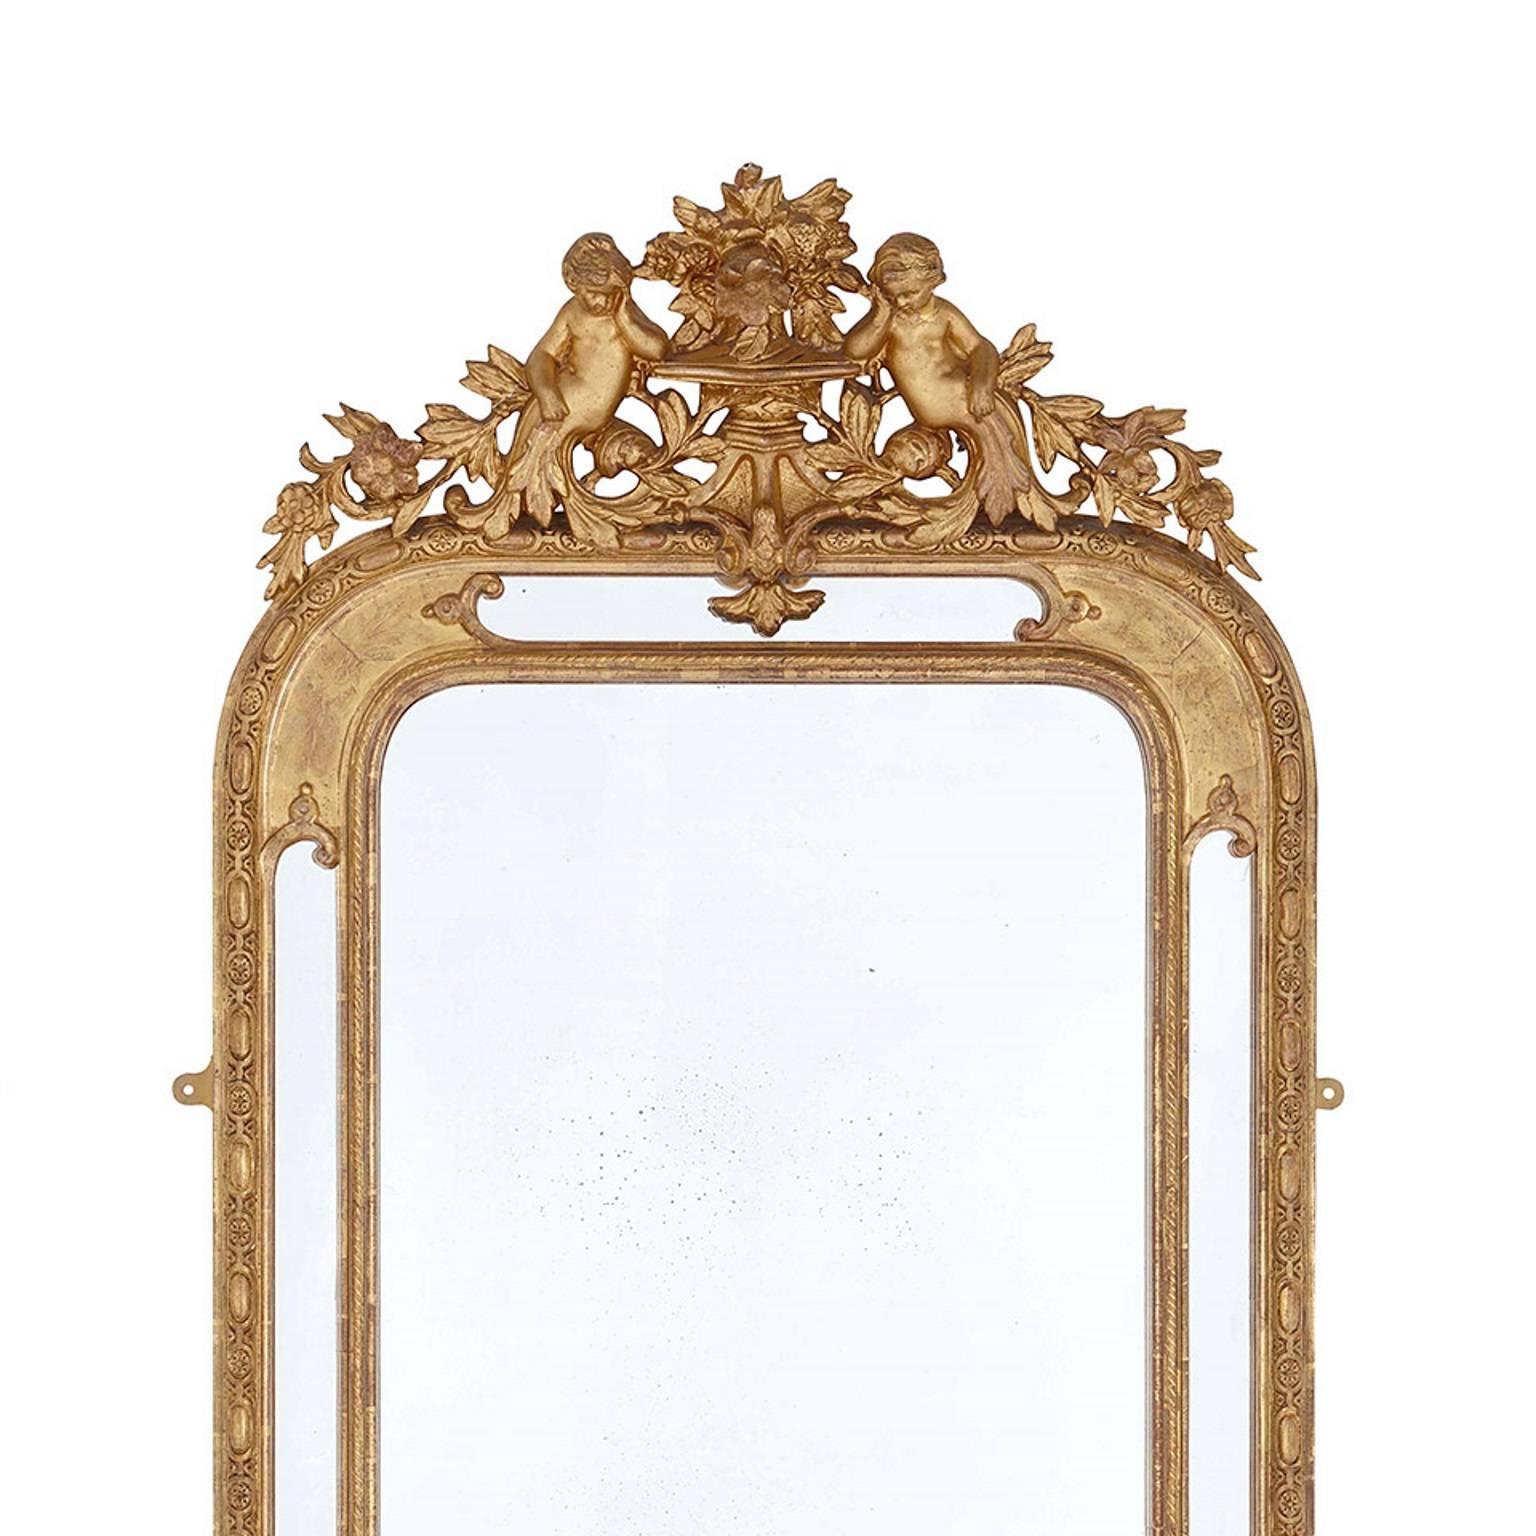 This pair of French mirrors are carved in the elegant neoclassical style. Each mirror is formed of a rectangular carved giltwood frame with curved edges at the top. Surmounting each frame is a vase with flowers flanked by two putti. Foliate